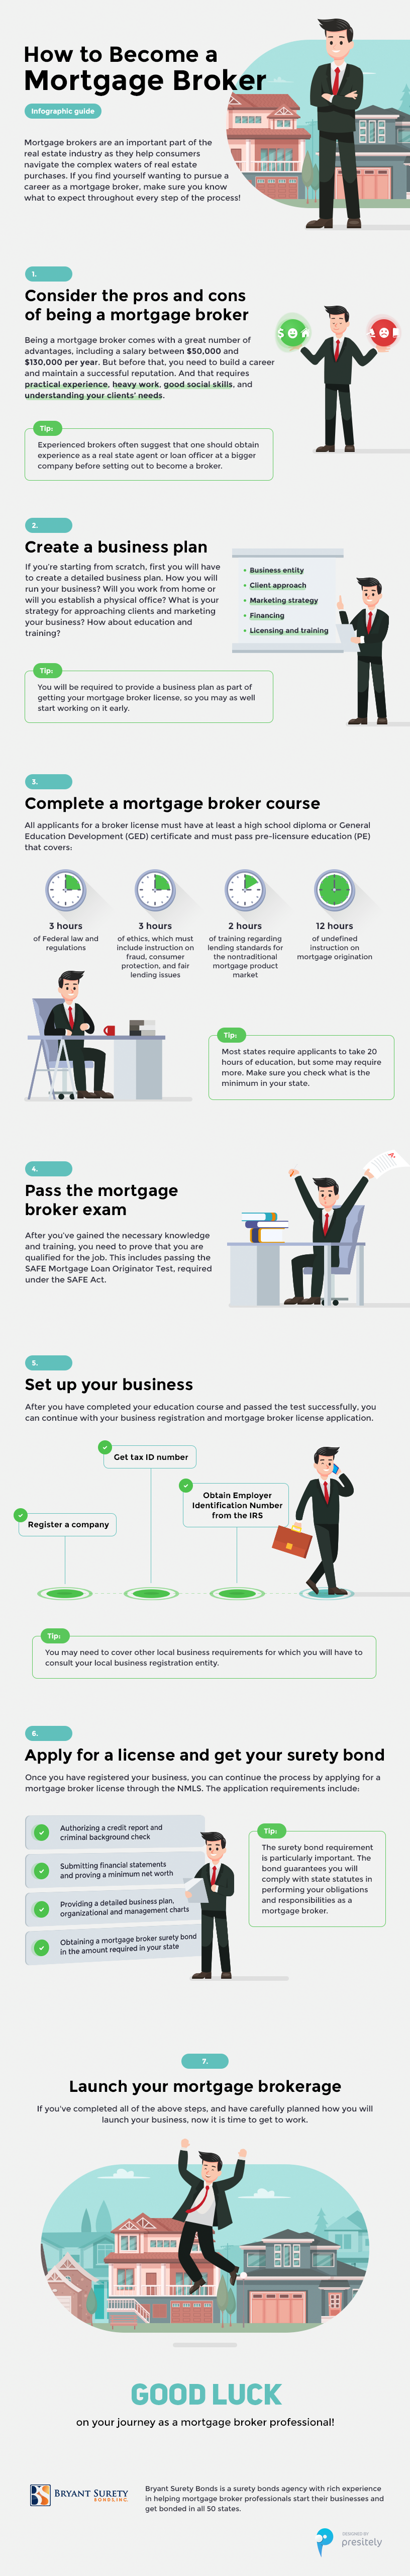 how to become a mortgage broker